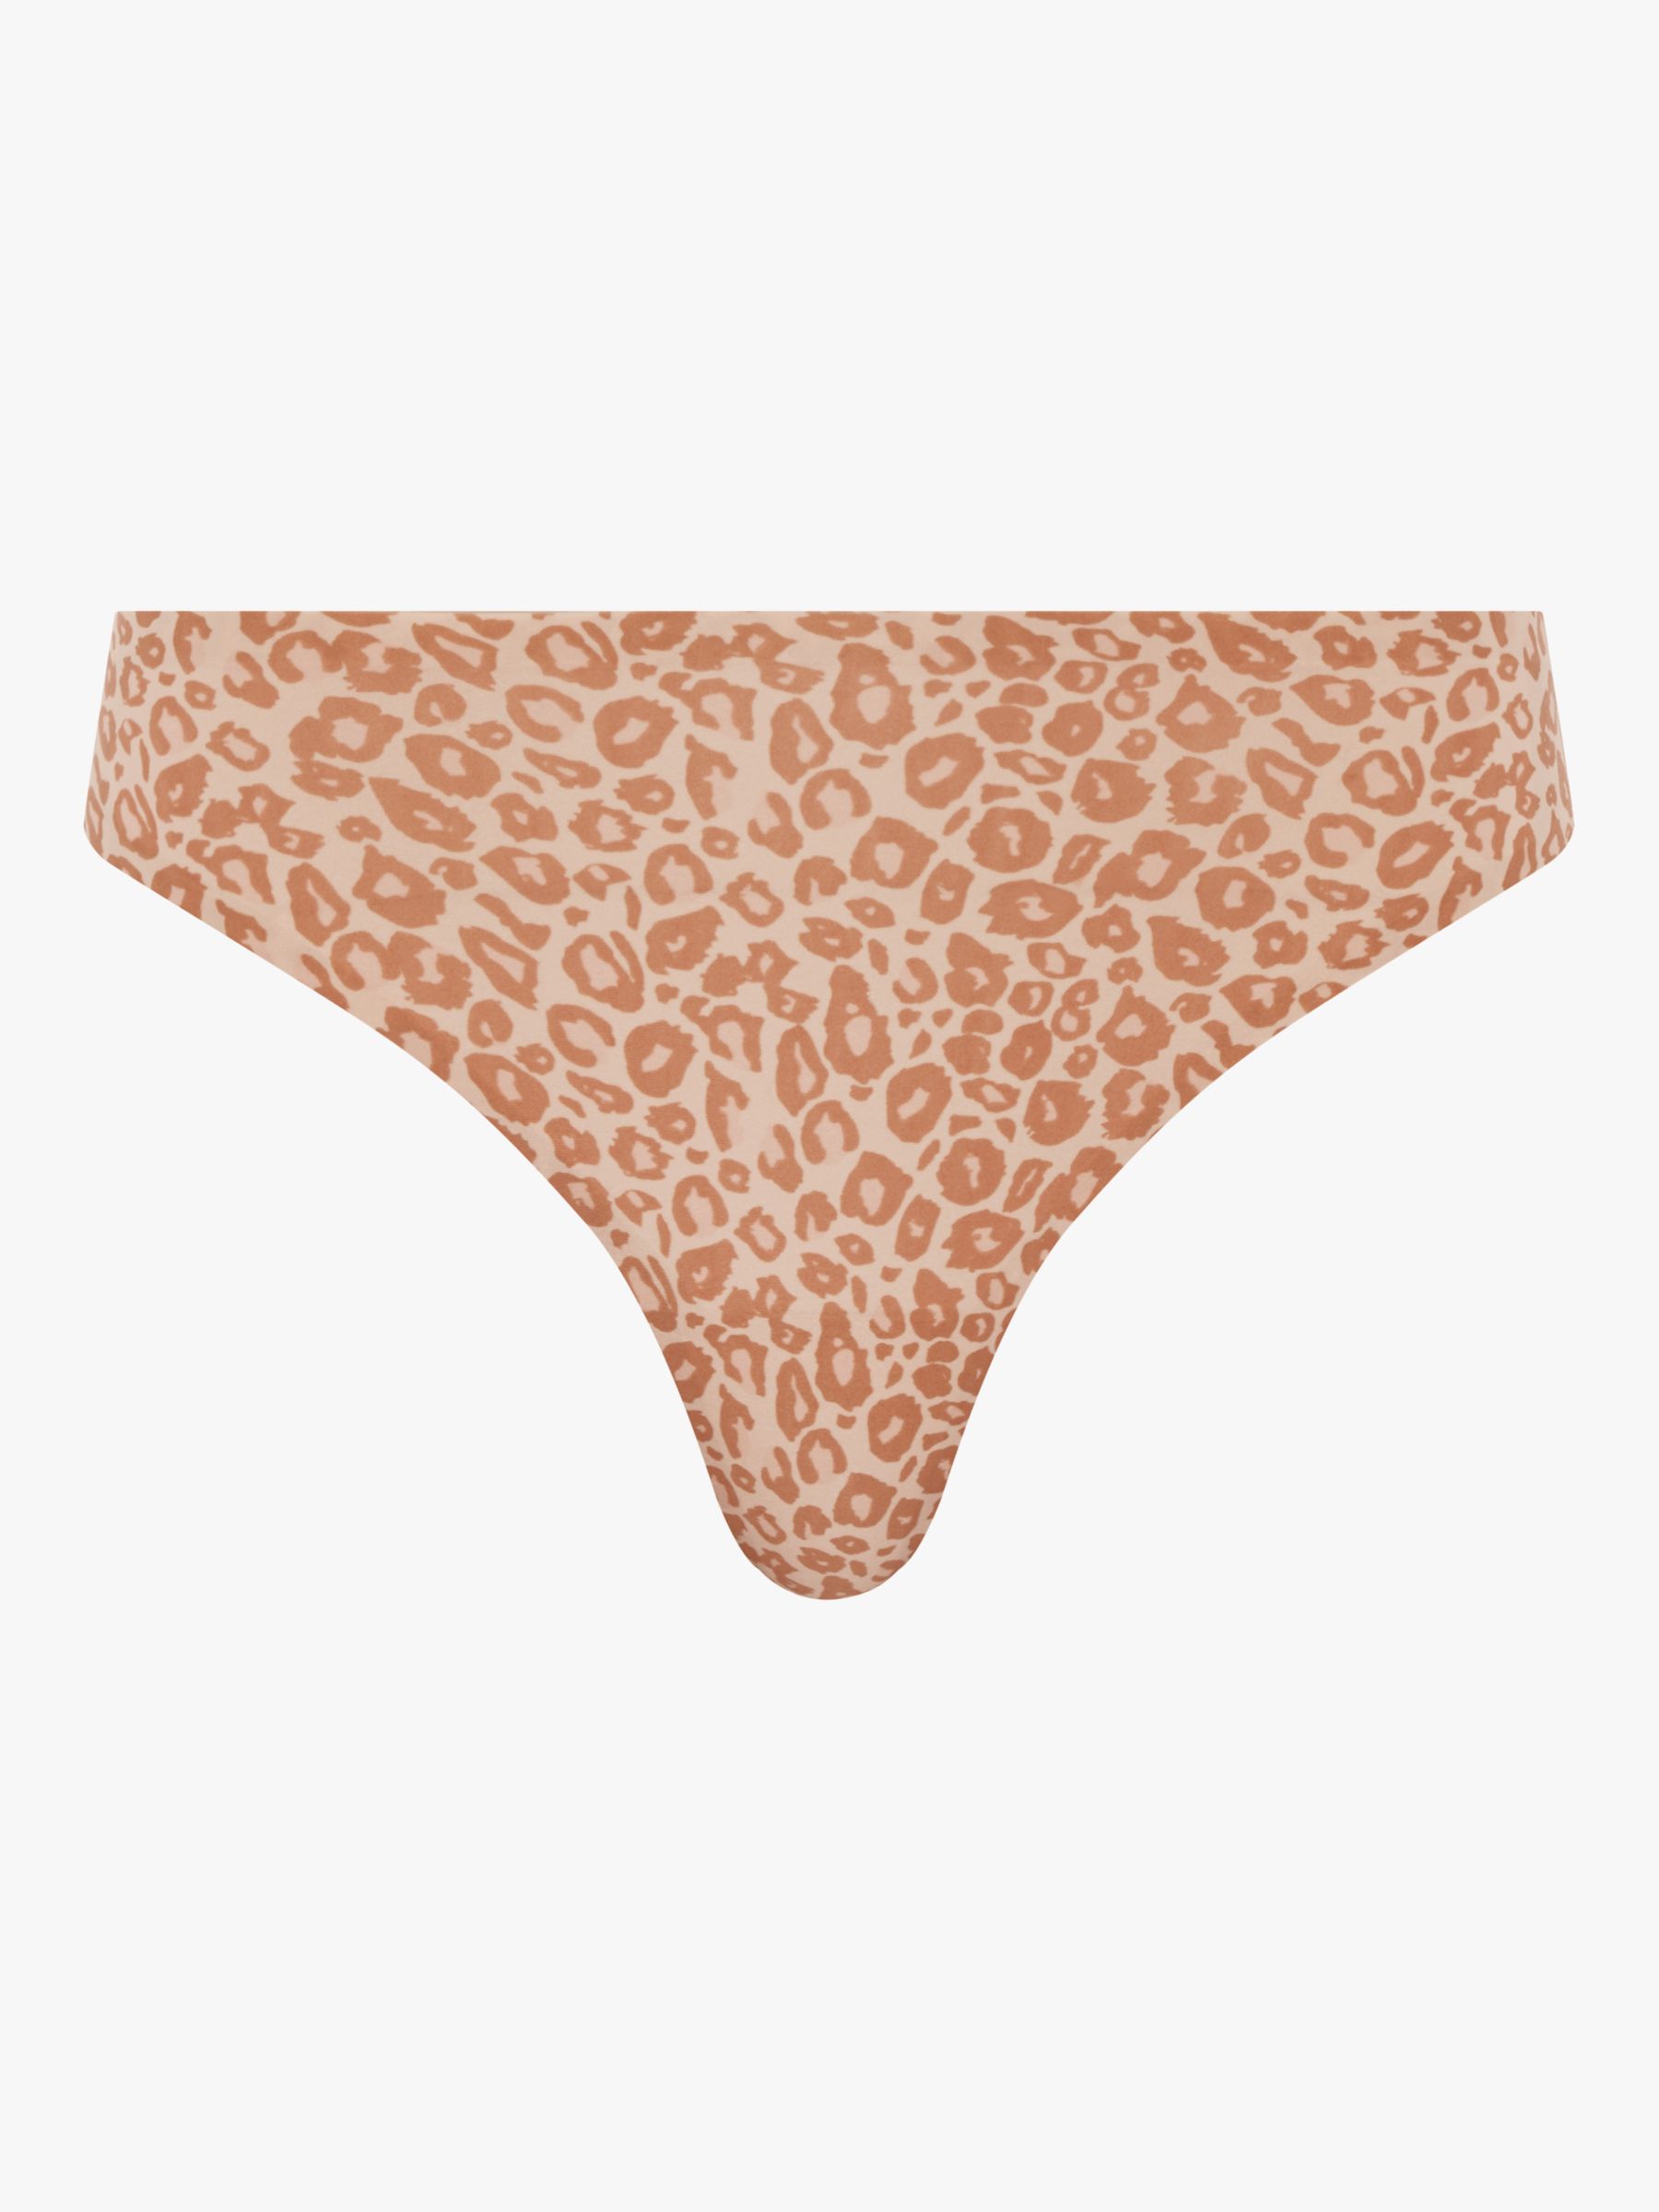 Chantelle Soft Stretch String, Leopard Neutral, One Size